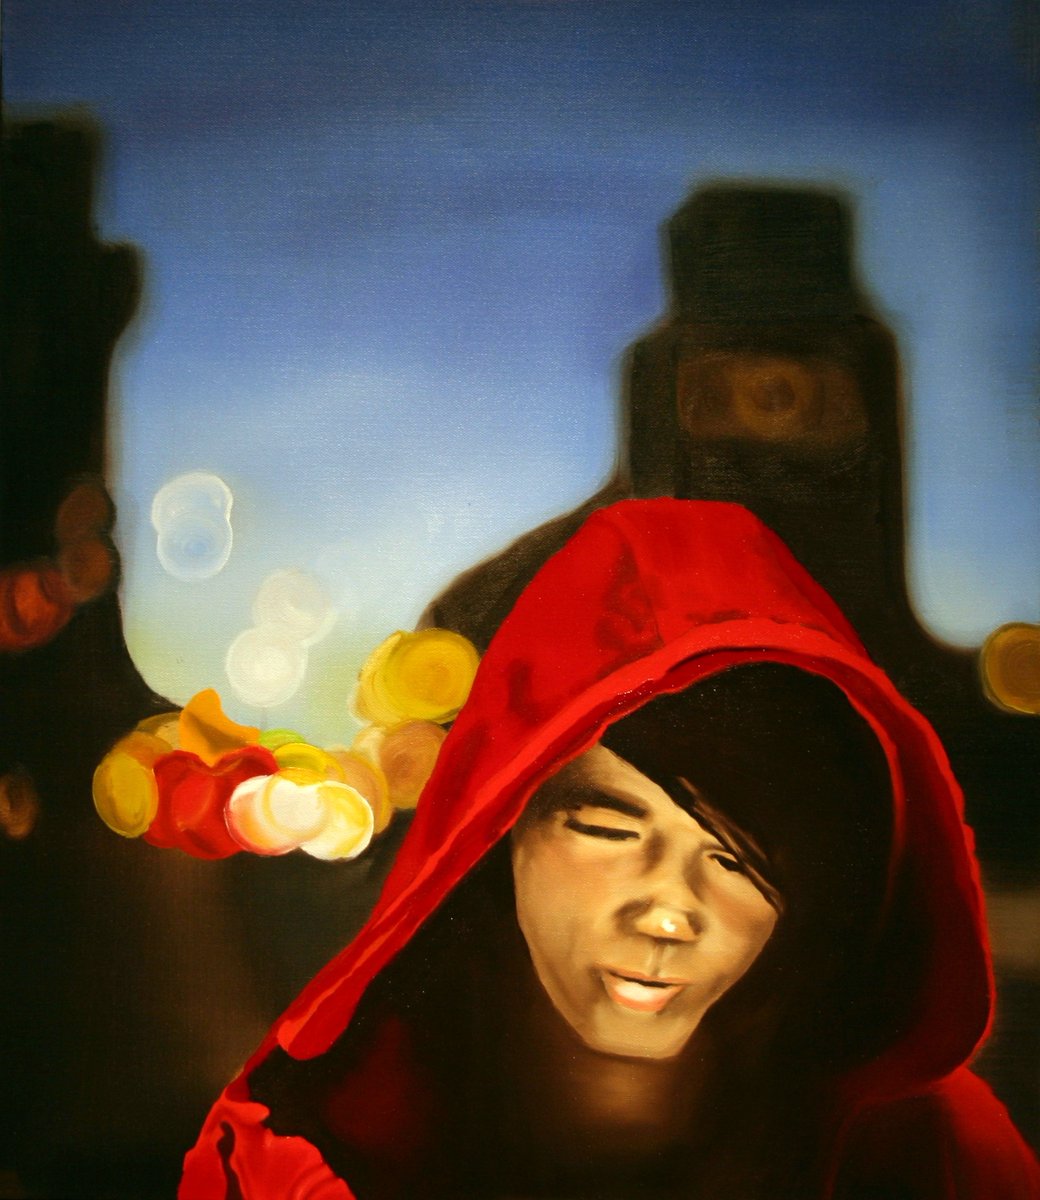 W. Max Thomason
Little Red Riding Hood
Acrylic & Oil on Canvas
24 X 20 inch
On display in gallery
Email info@bitfactory.net all inquiries
#BitfactoryGallery #WMaxThomason #Bespoke #SoloExhibition #OilPainting #FigurativeArt #NaturalRealism #FigurePainting #Nocturnes #Urbanscapes